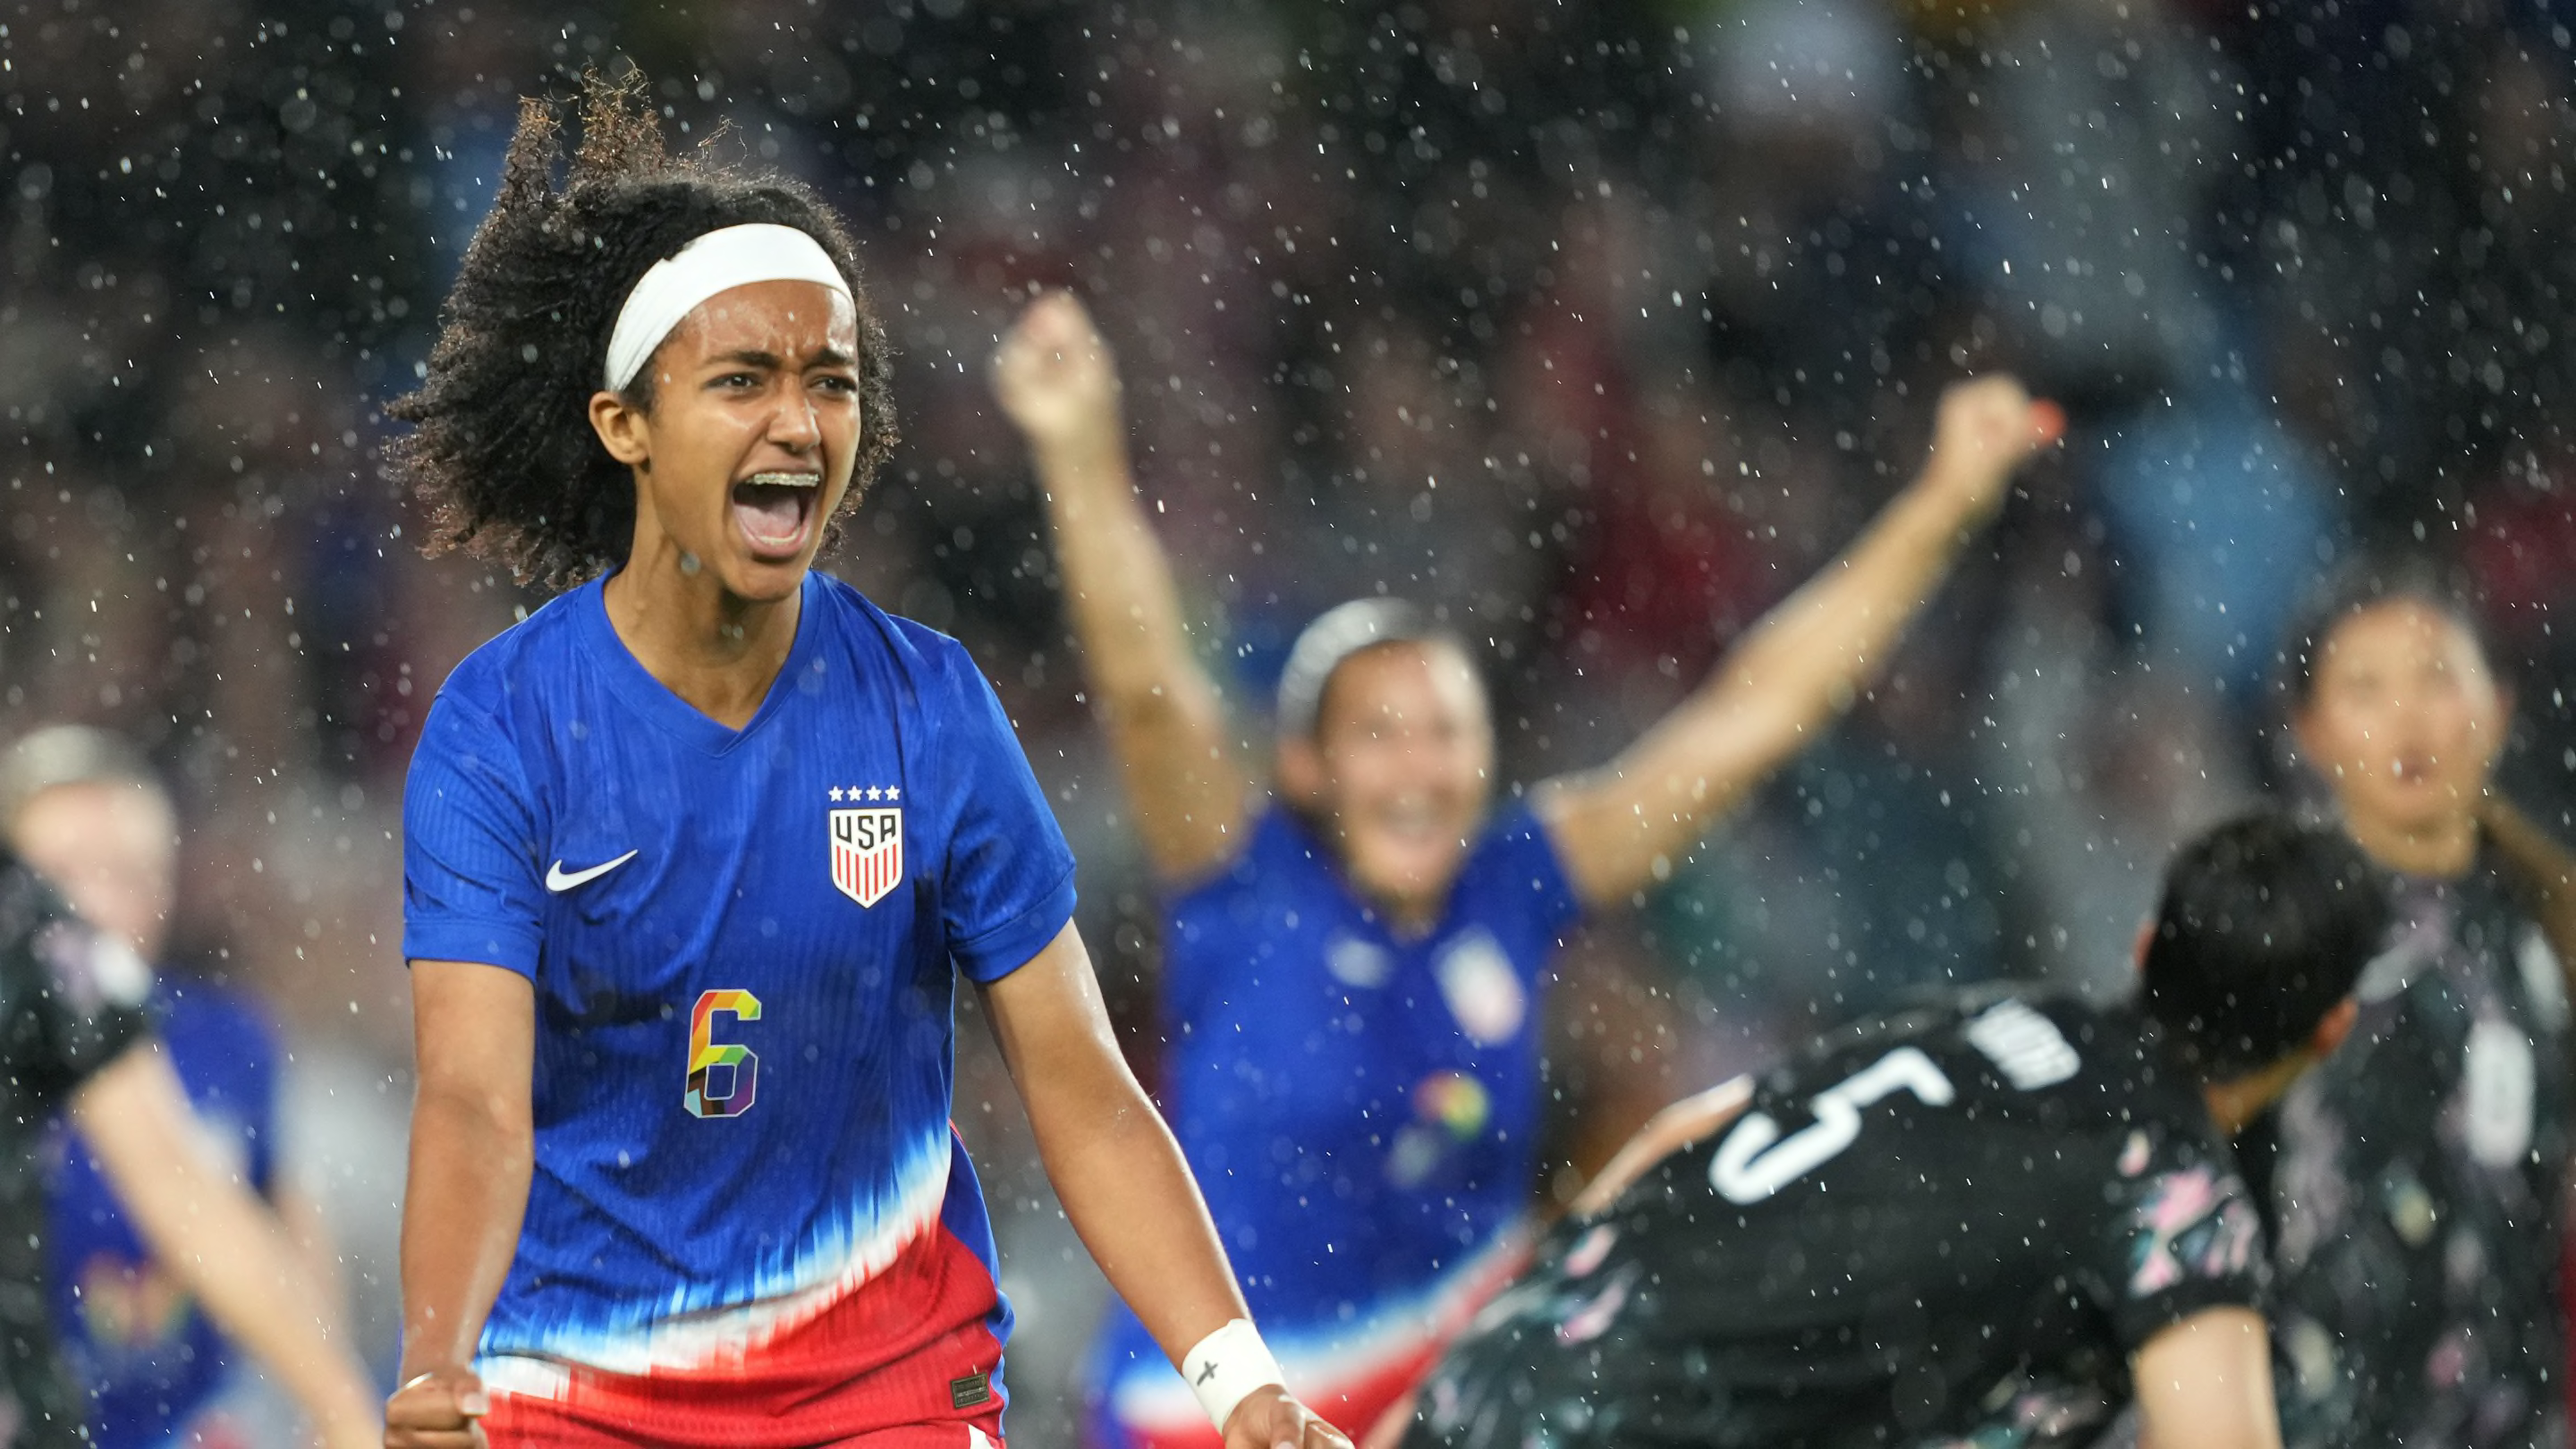 Lily Yohannes scores in 'dream debut' for United States